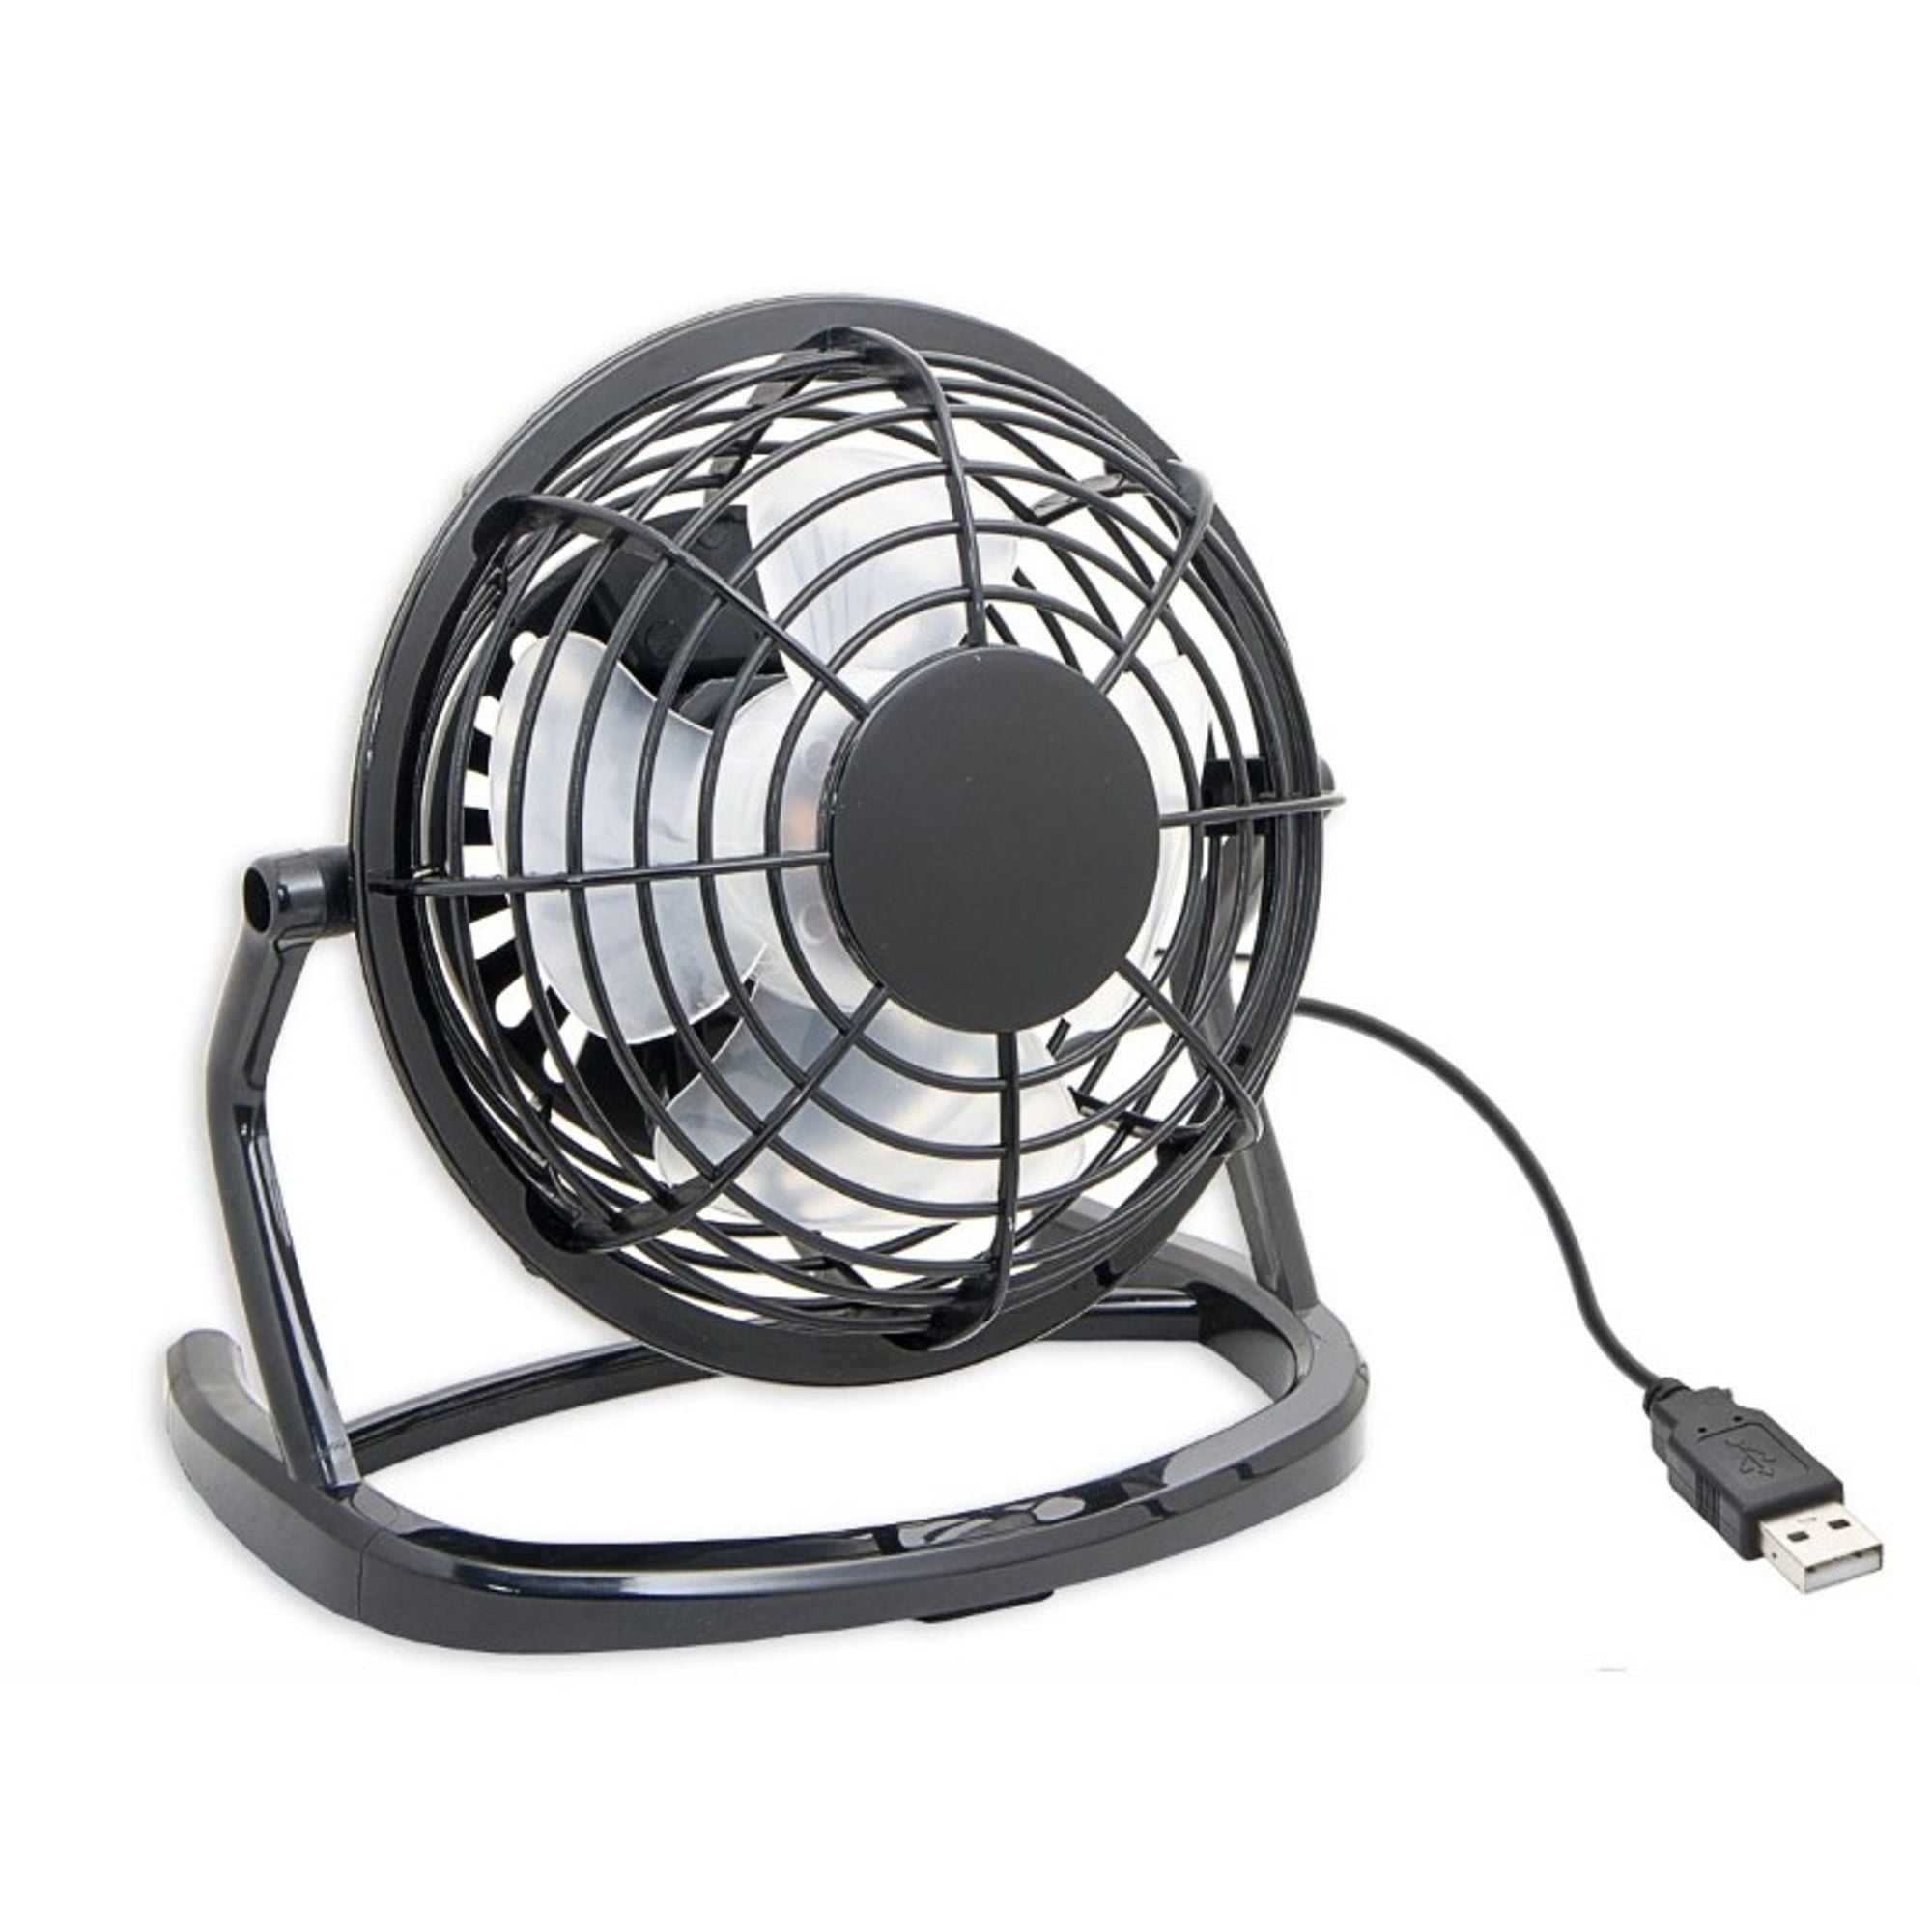 9" INCH OSCILLATING DESK FAN 2 SPEED TABLE PORTABLE COOLING HOME OFFICE 31102 